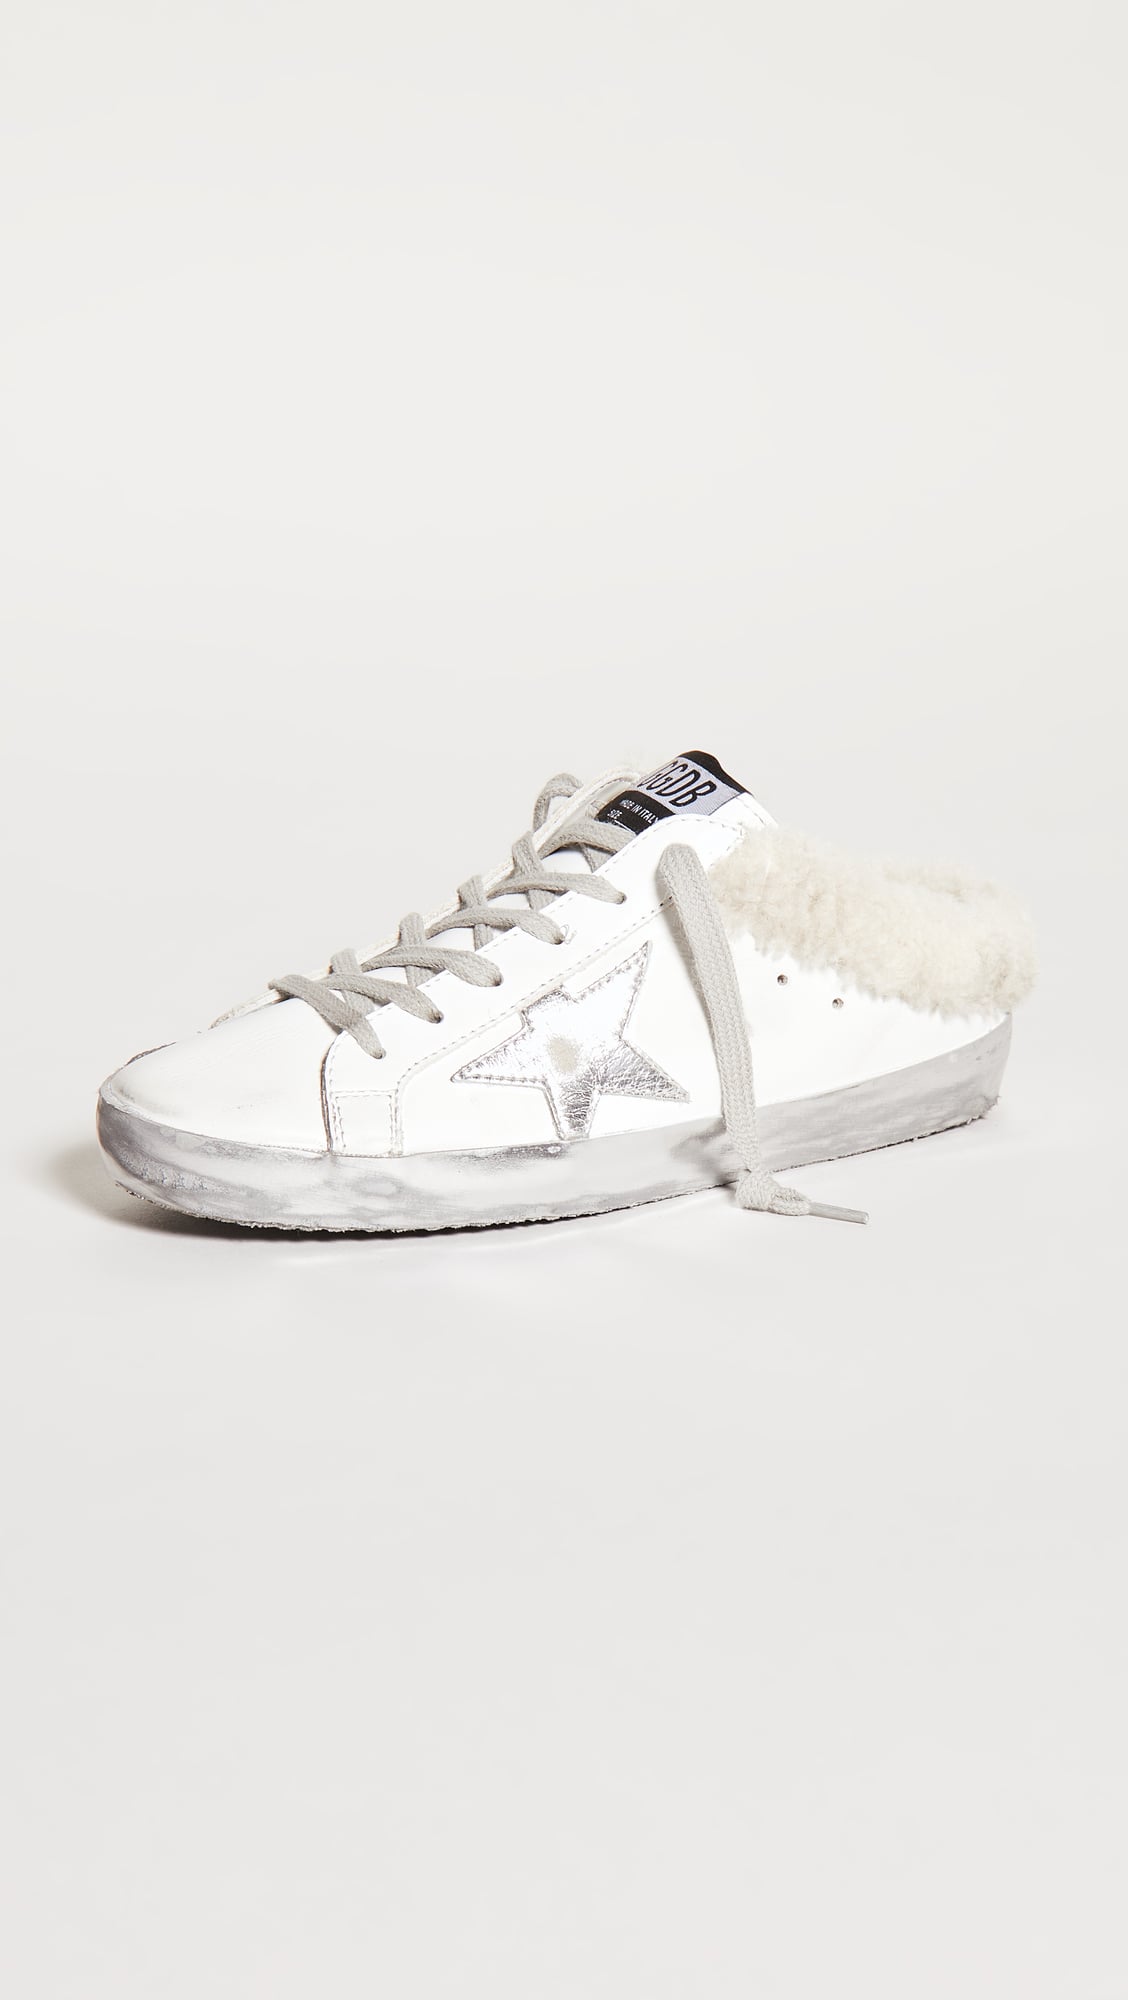 Golden Sabot Shearling Sneakers | 'Tis the Season Where It's Socially to Wear Shearling Slippers With | POPSUGAR Fashion 17